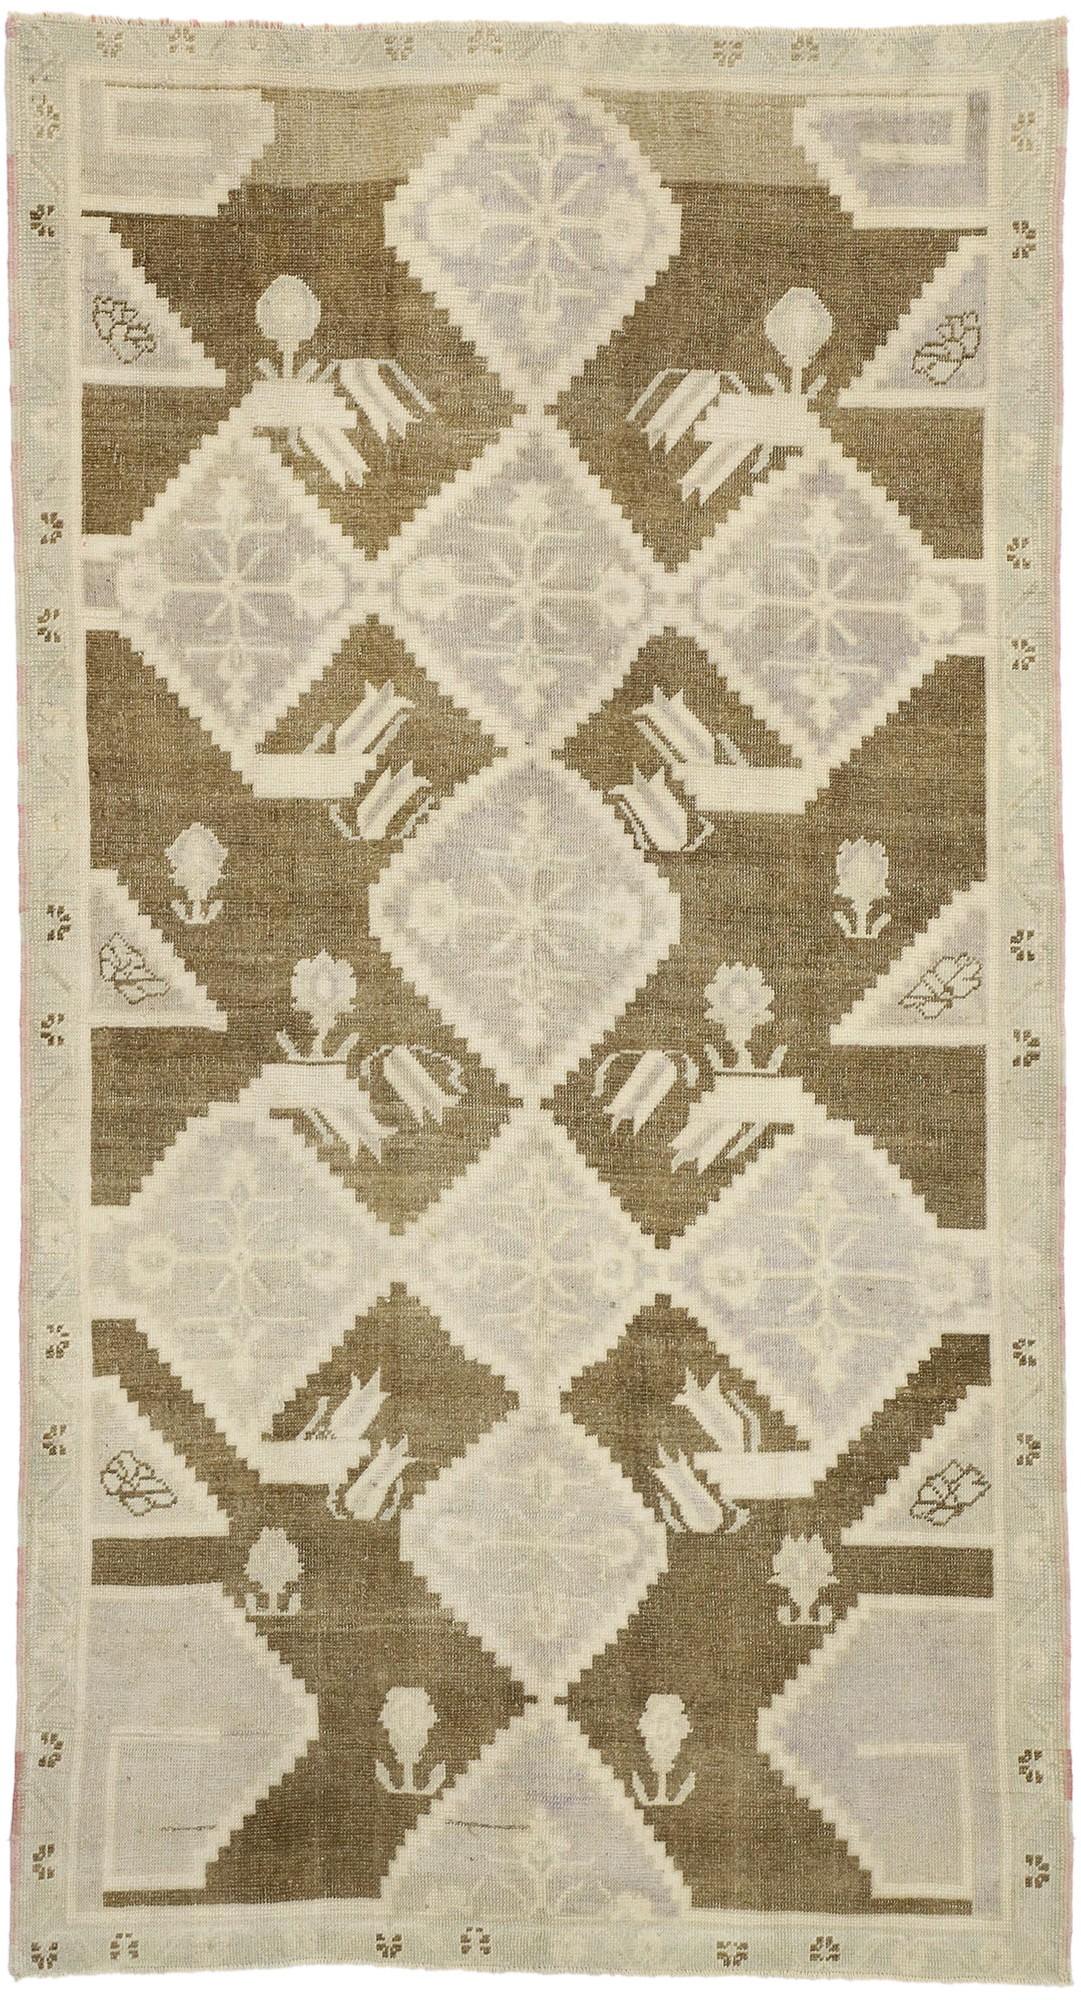 52469 Vintage Turkish Oushak Rug with Swedish Cottage Style. This gorgeous authentic hand knotted wool vintage Turkish Oushak Rug features all the charms of Swedish Cottage Style. Soothing colors evoke calm and balance. The palette provides a soft